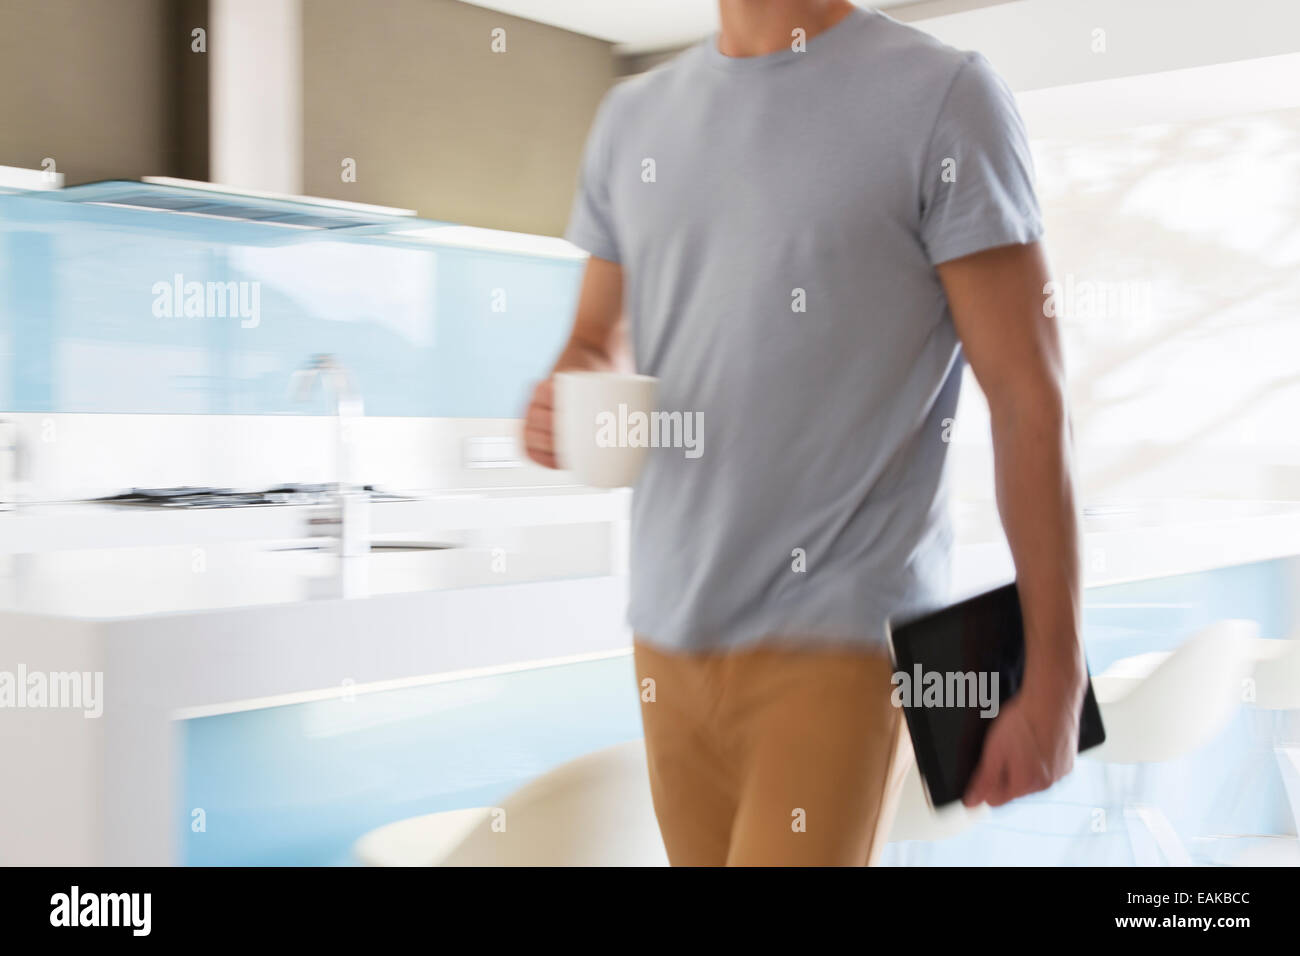 Man carrying coffee cup and digital tablet walking through modern kitchen Stock Photo